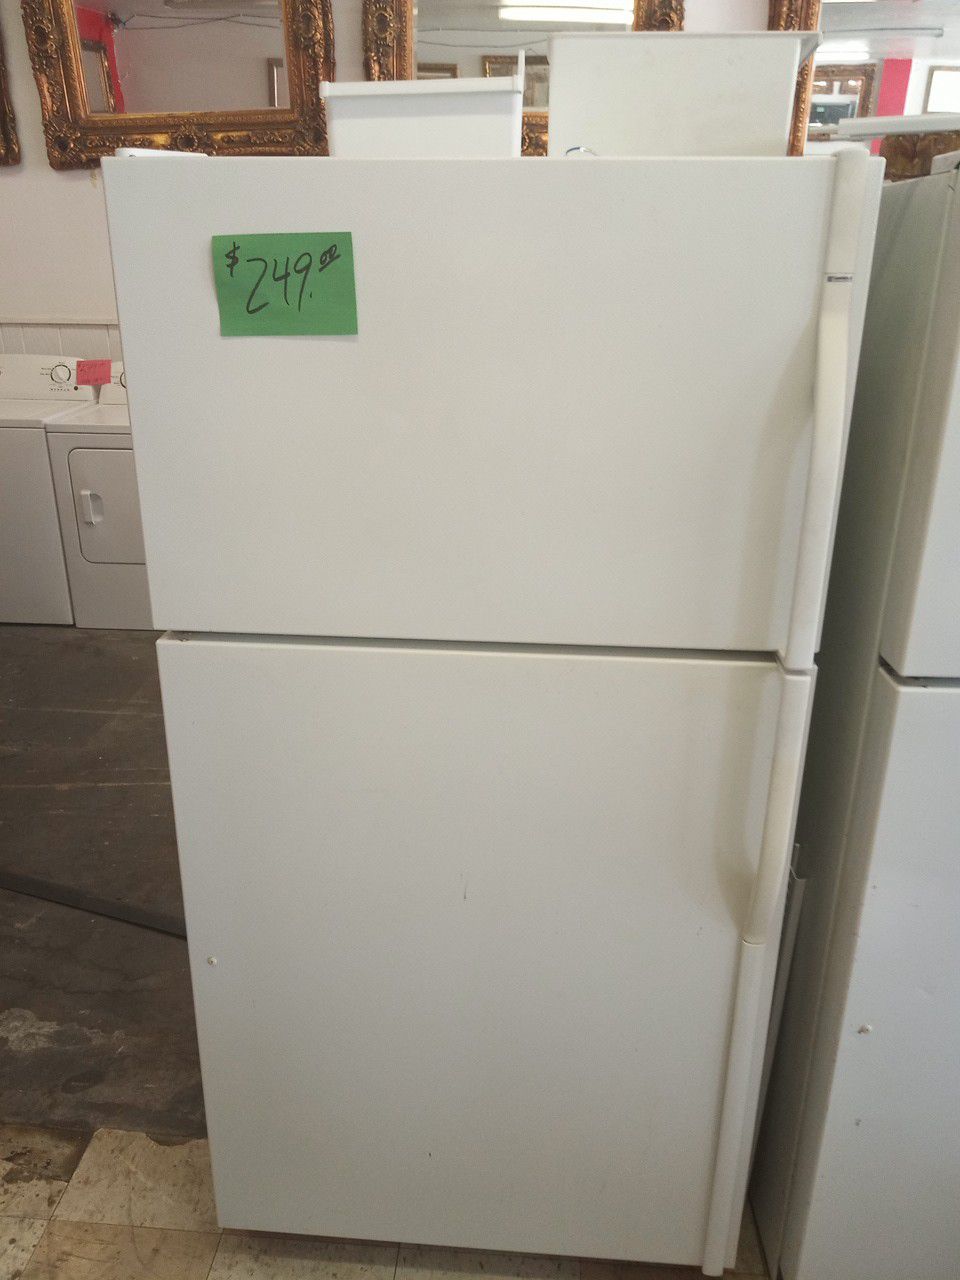 Kenmore Refrigerator white ex large 33" excellent . Warranty , Delivery available 2203 Fowler st. Ft. Myers 33901